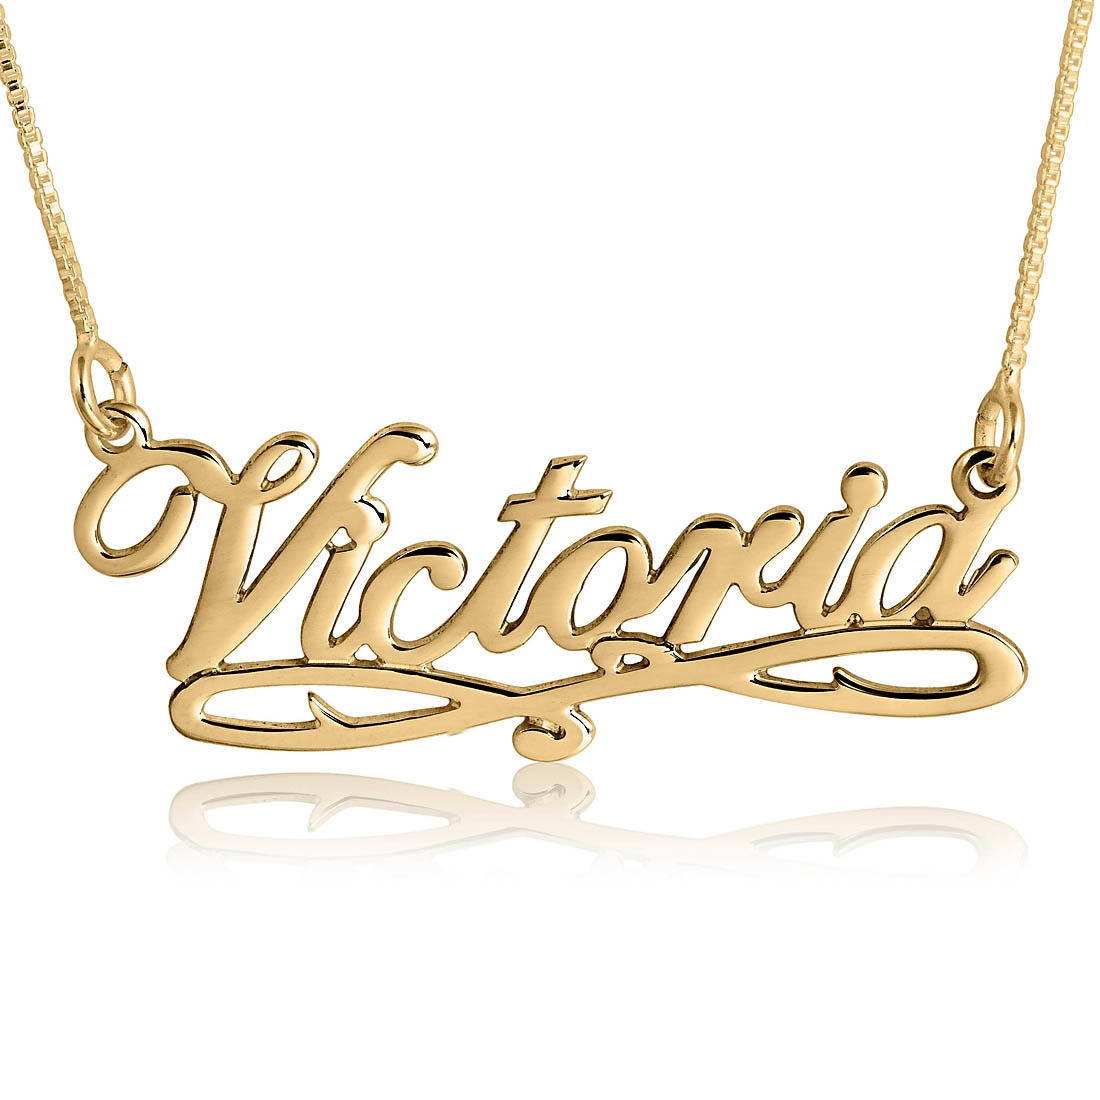 Delicate Calligraphy Name Necklace, 24k Gold Plated - 1